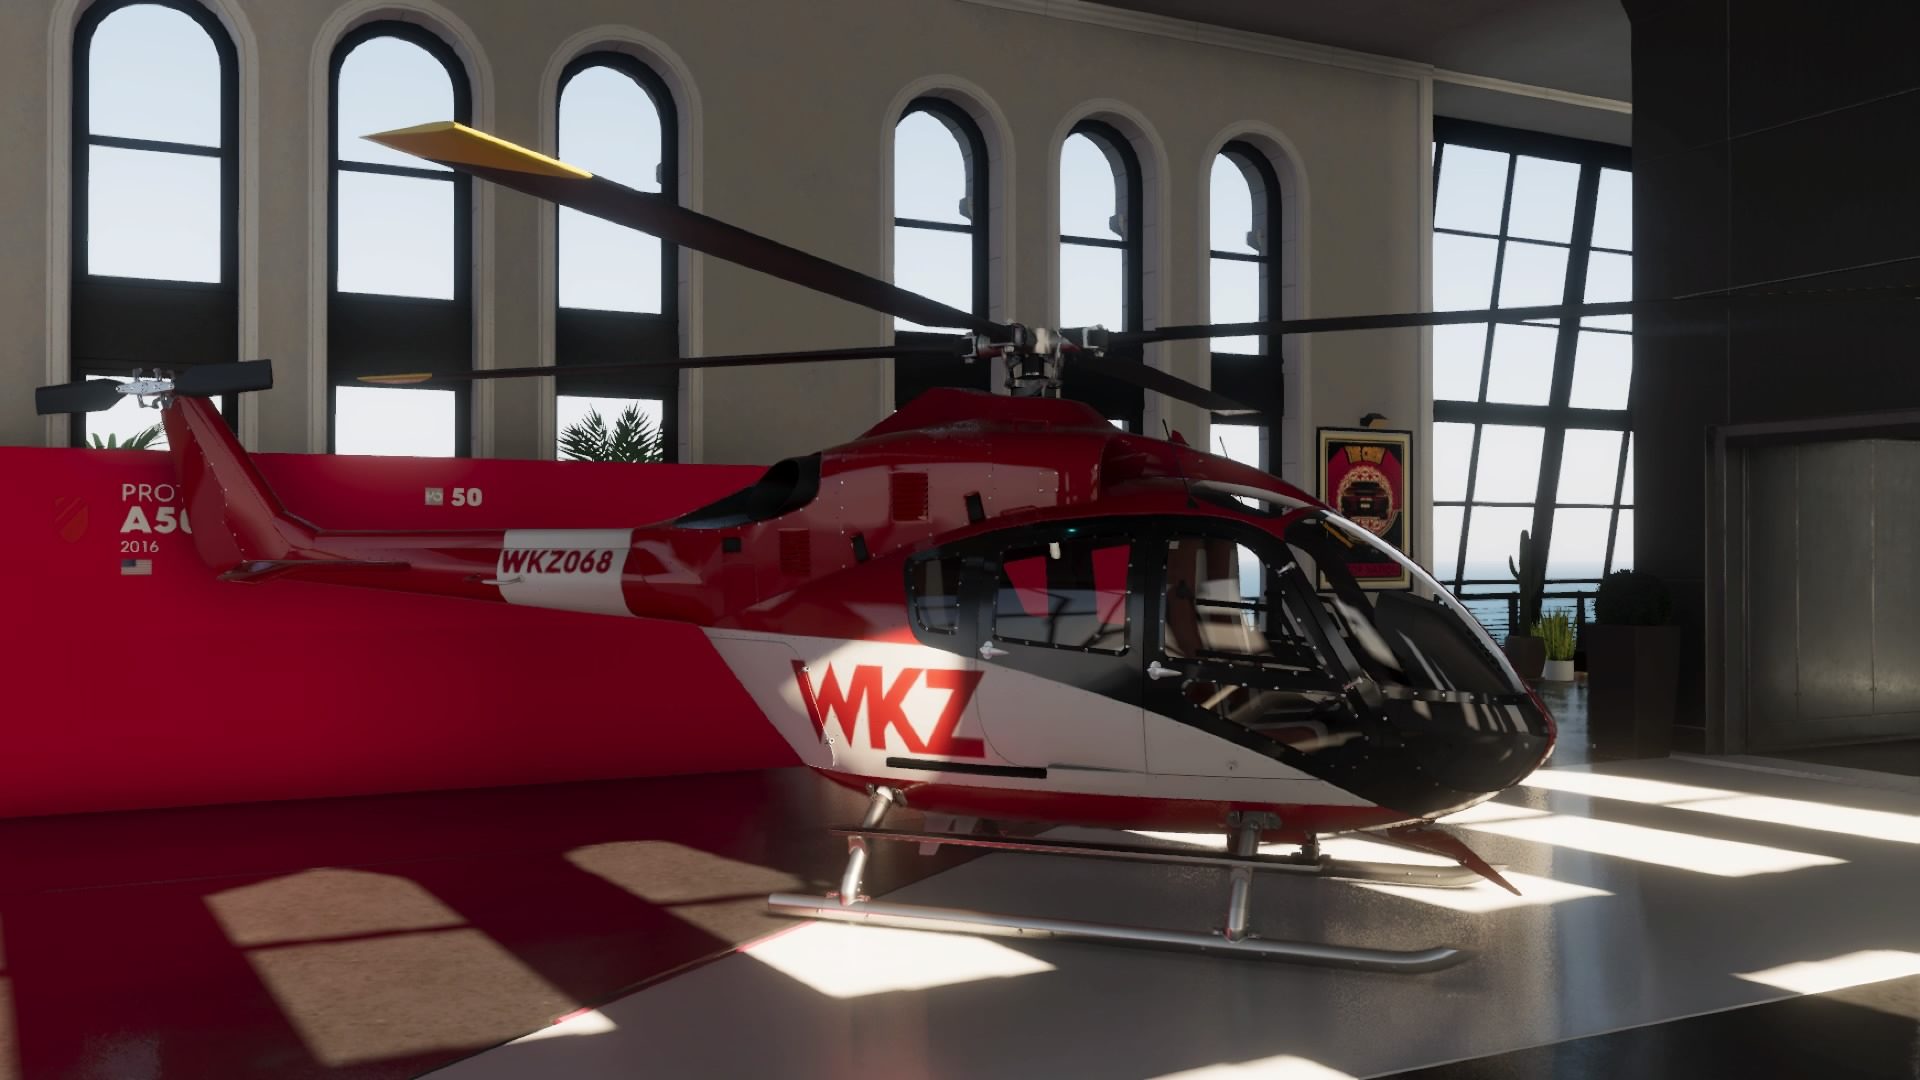 The Crew 2 - News helicopter that looks more like an ambulance helicopter